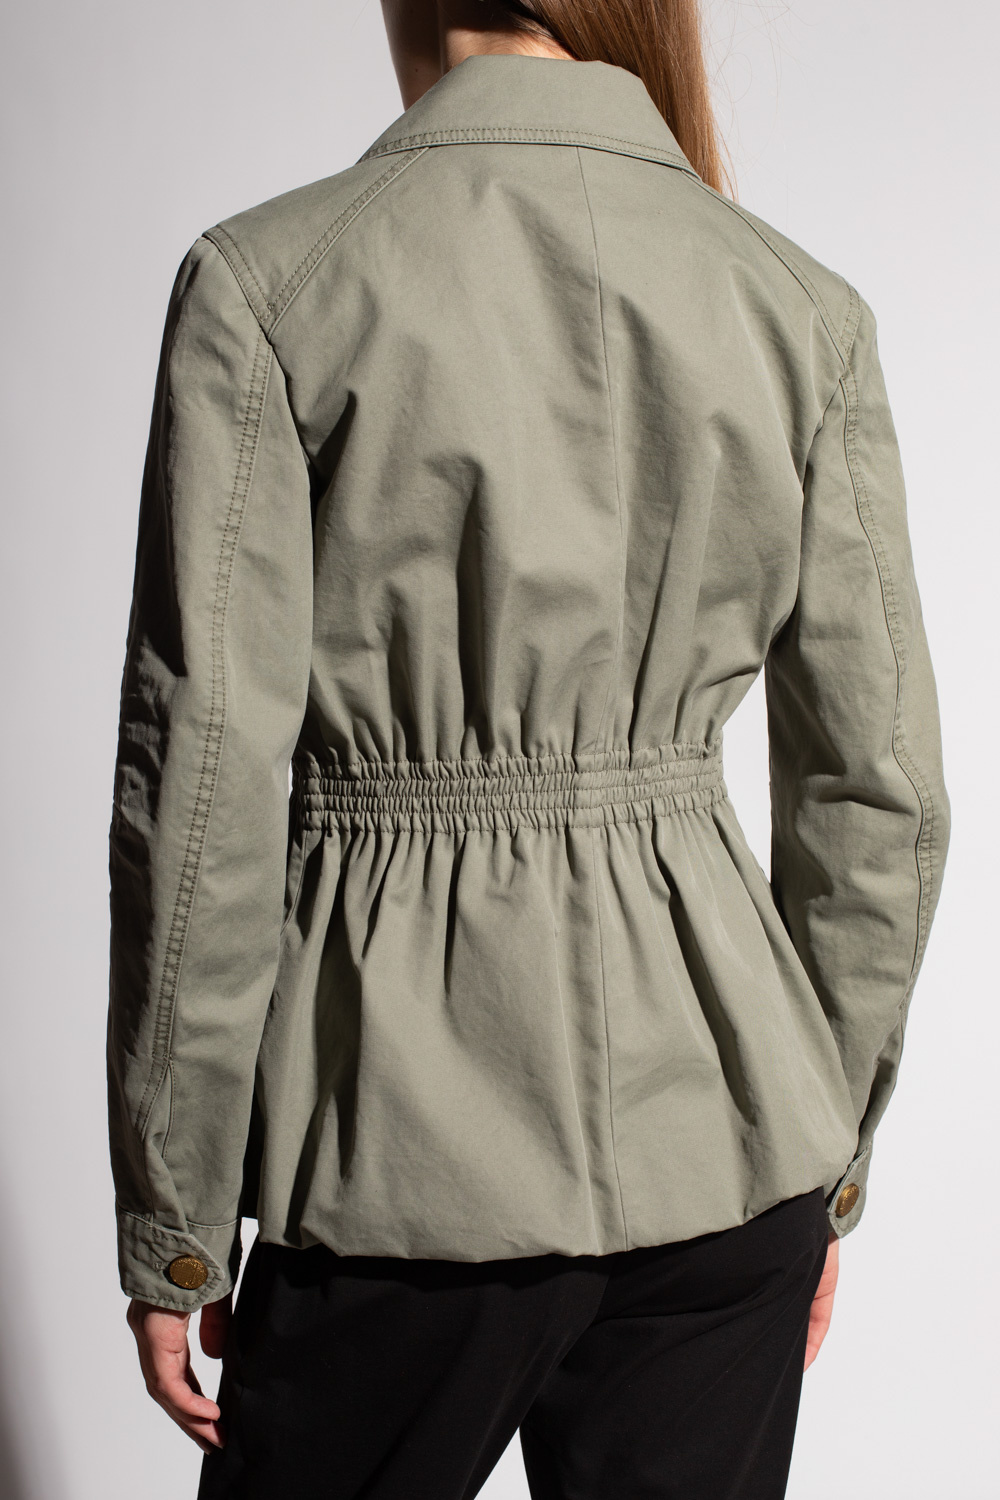 Dsquared2 Military style jacket